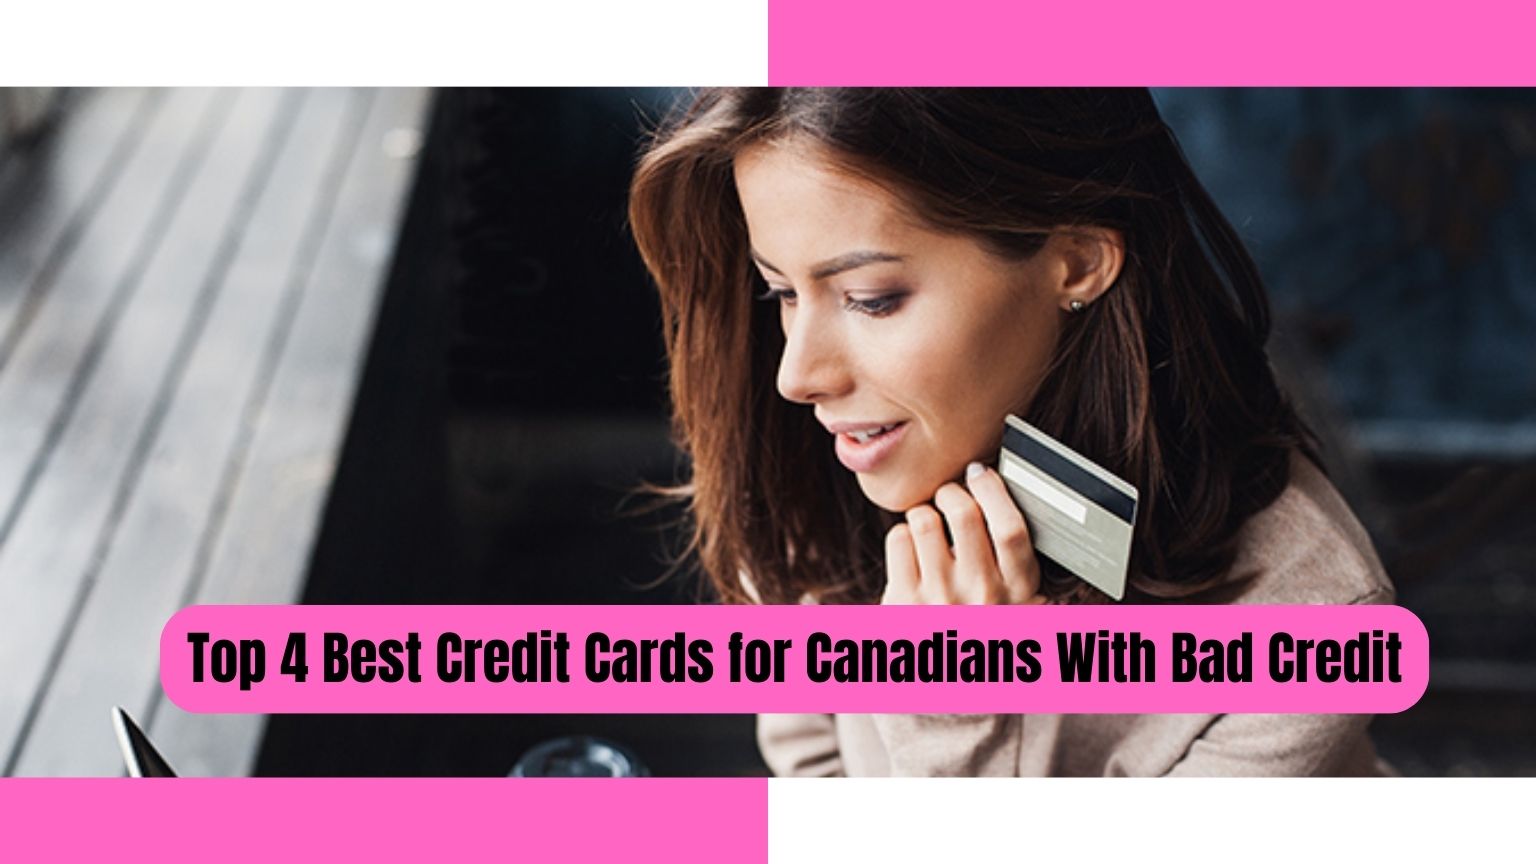 Top 4 Best Credit Cards for Canadians With Bad Credit